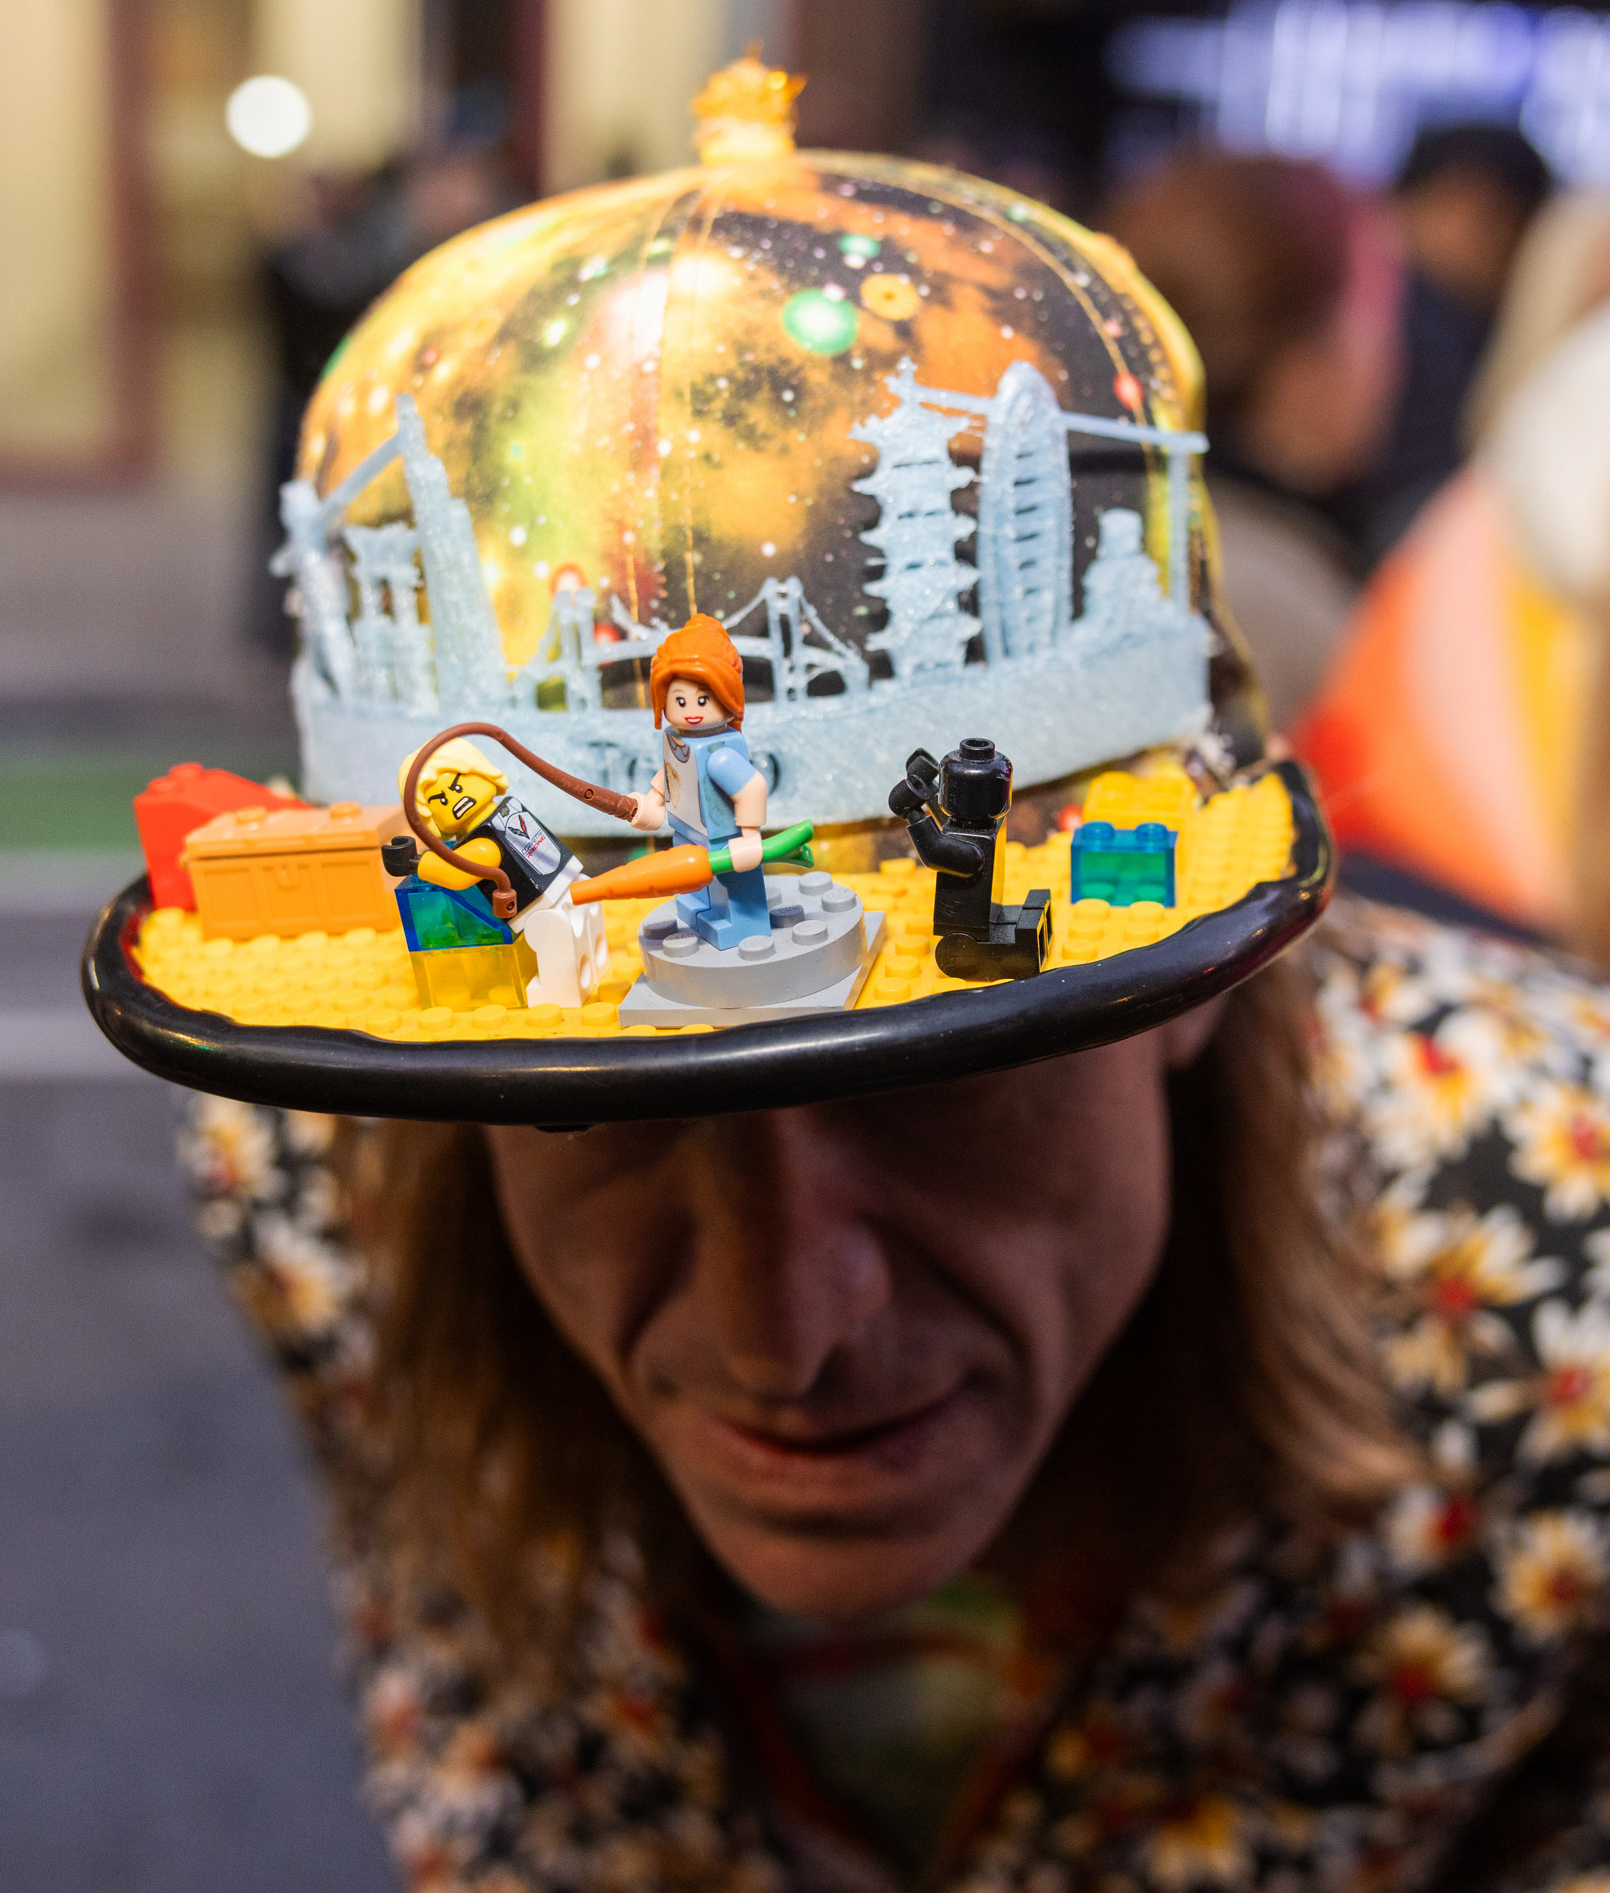 A man shows off his custom hat with legos on it.